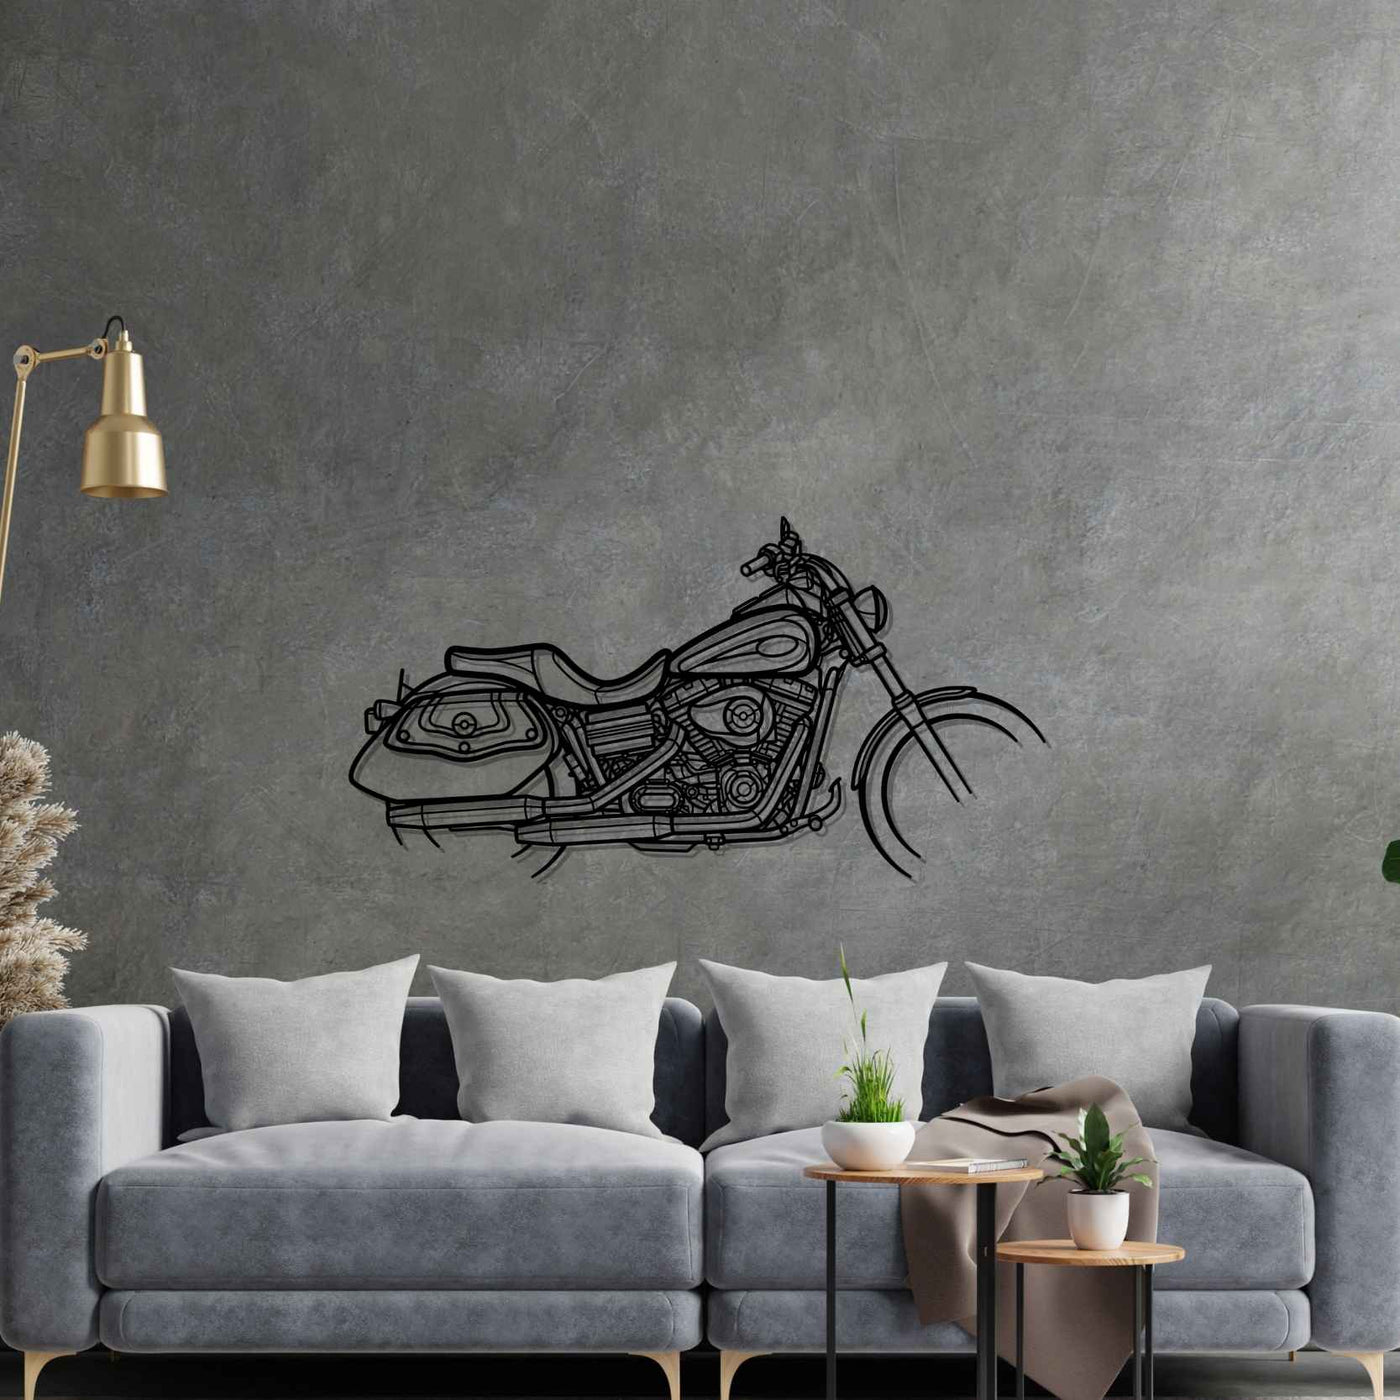 Dyna Low Rider 2008 Silhouette Metal Wall Art